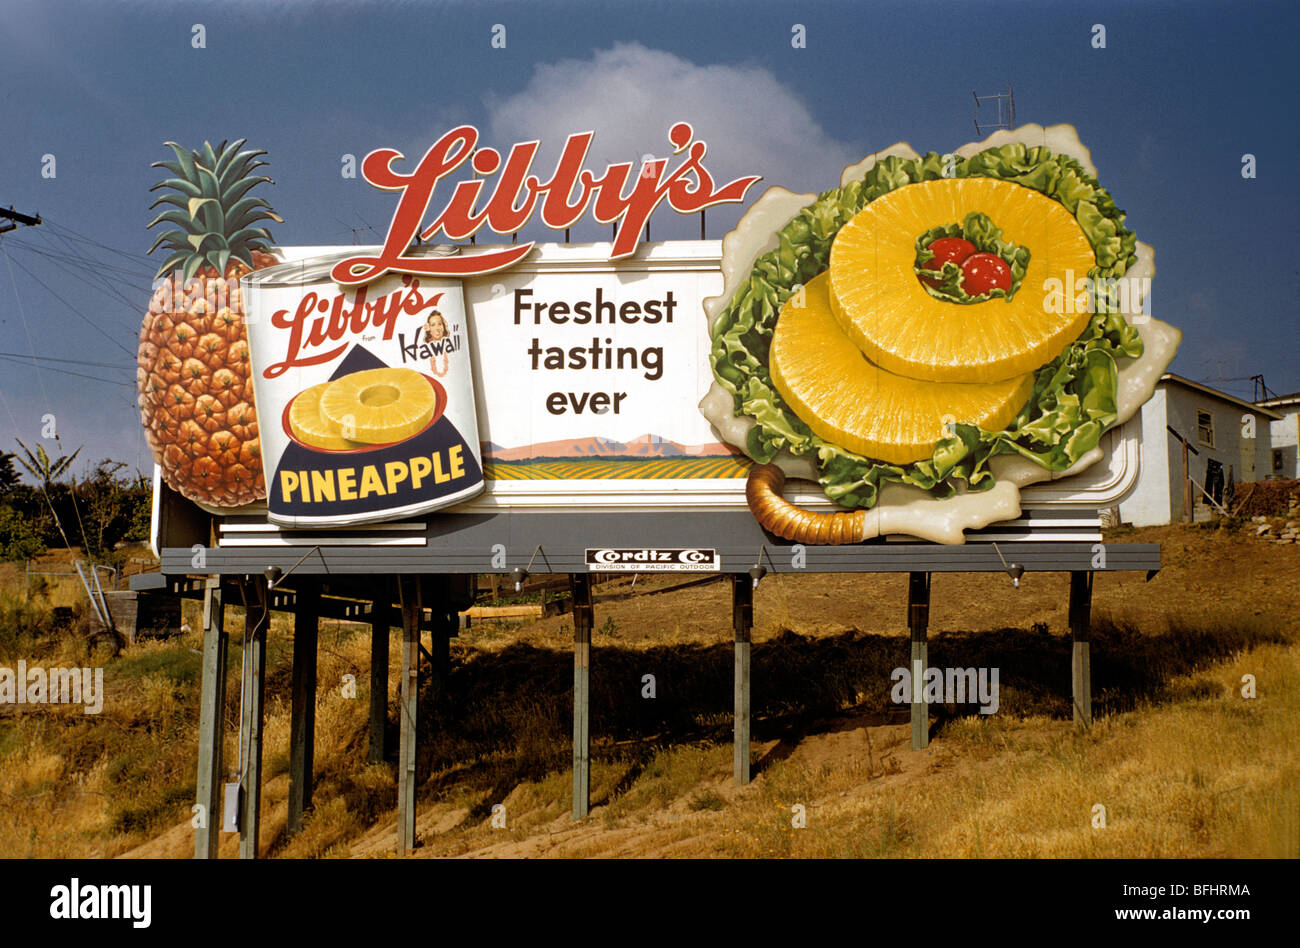 Billboard advertising Libby's canned pineapple Stock Photo